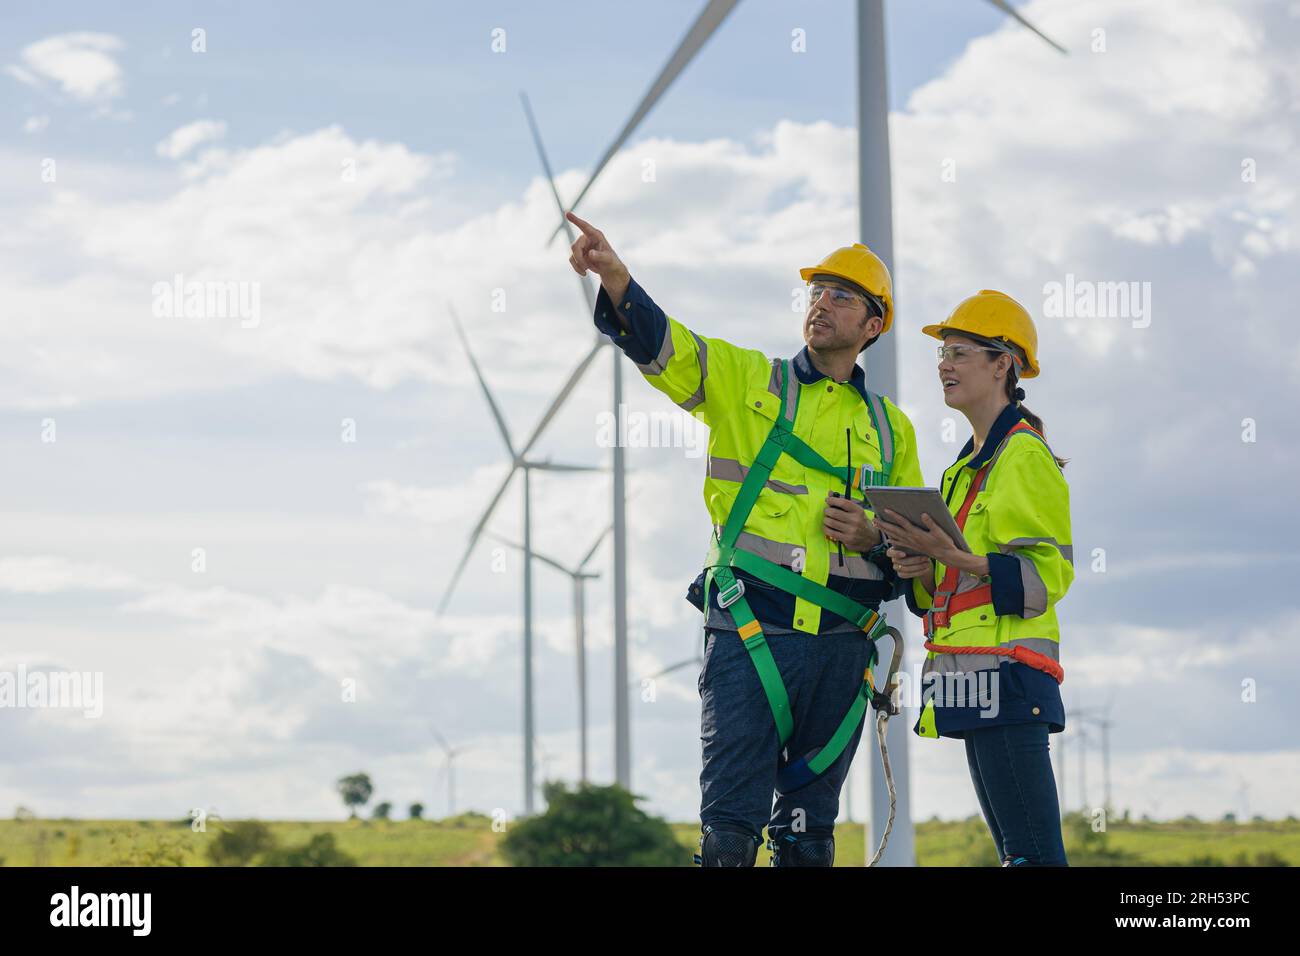 Engineer team man and woman field working together survey plan construction wind turbine clean power generator Stock Photo